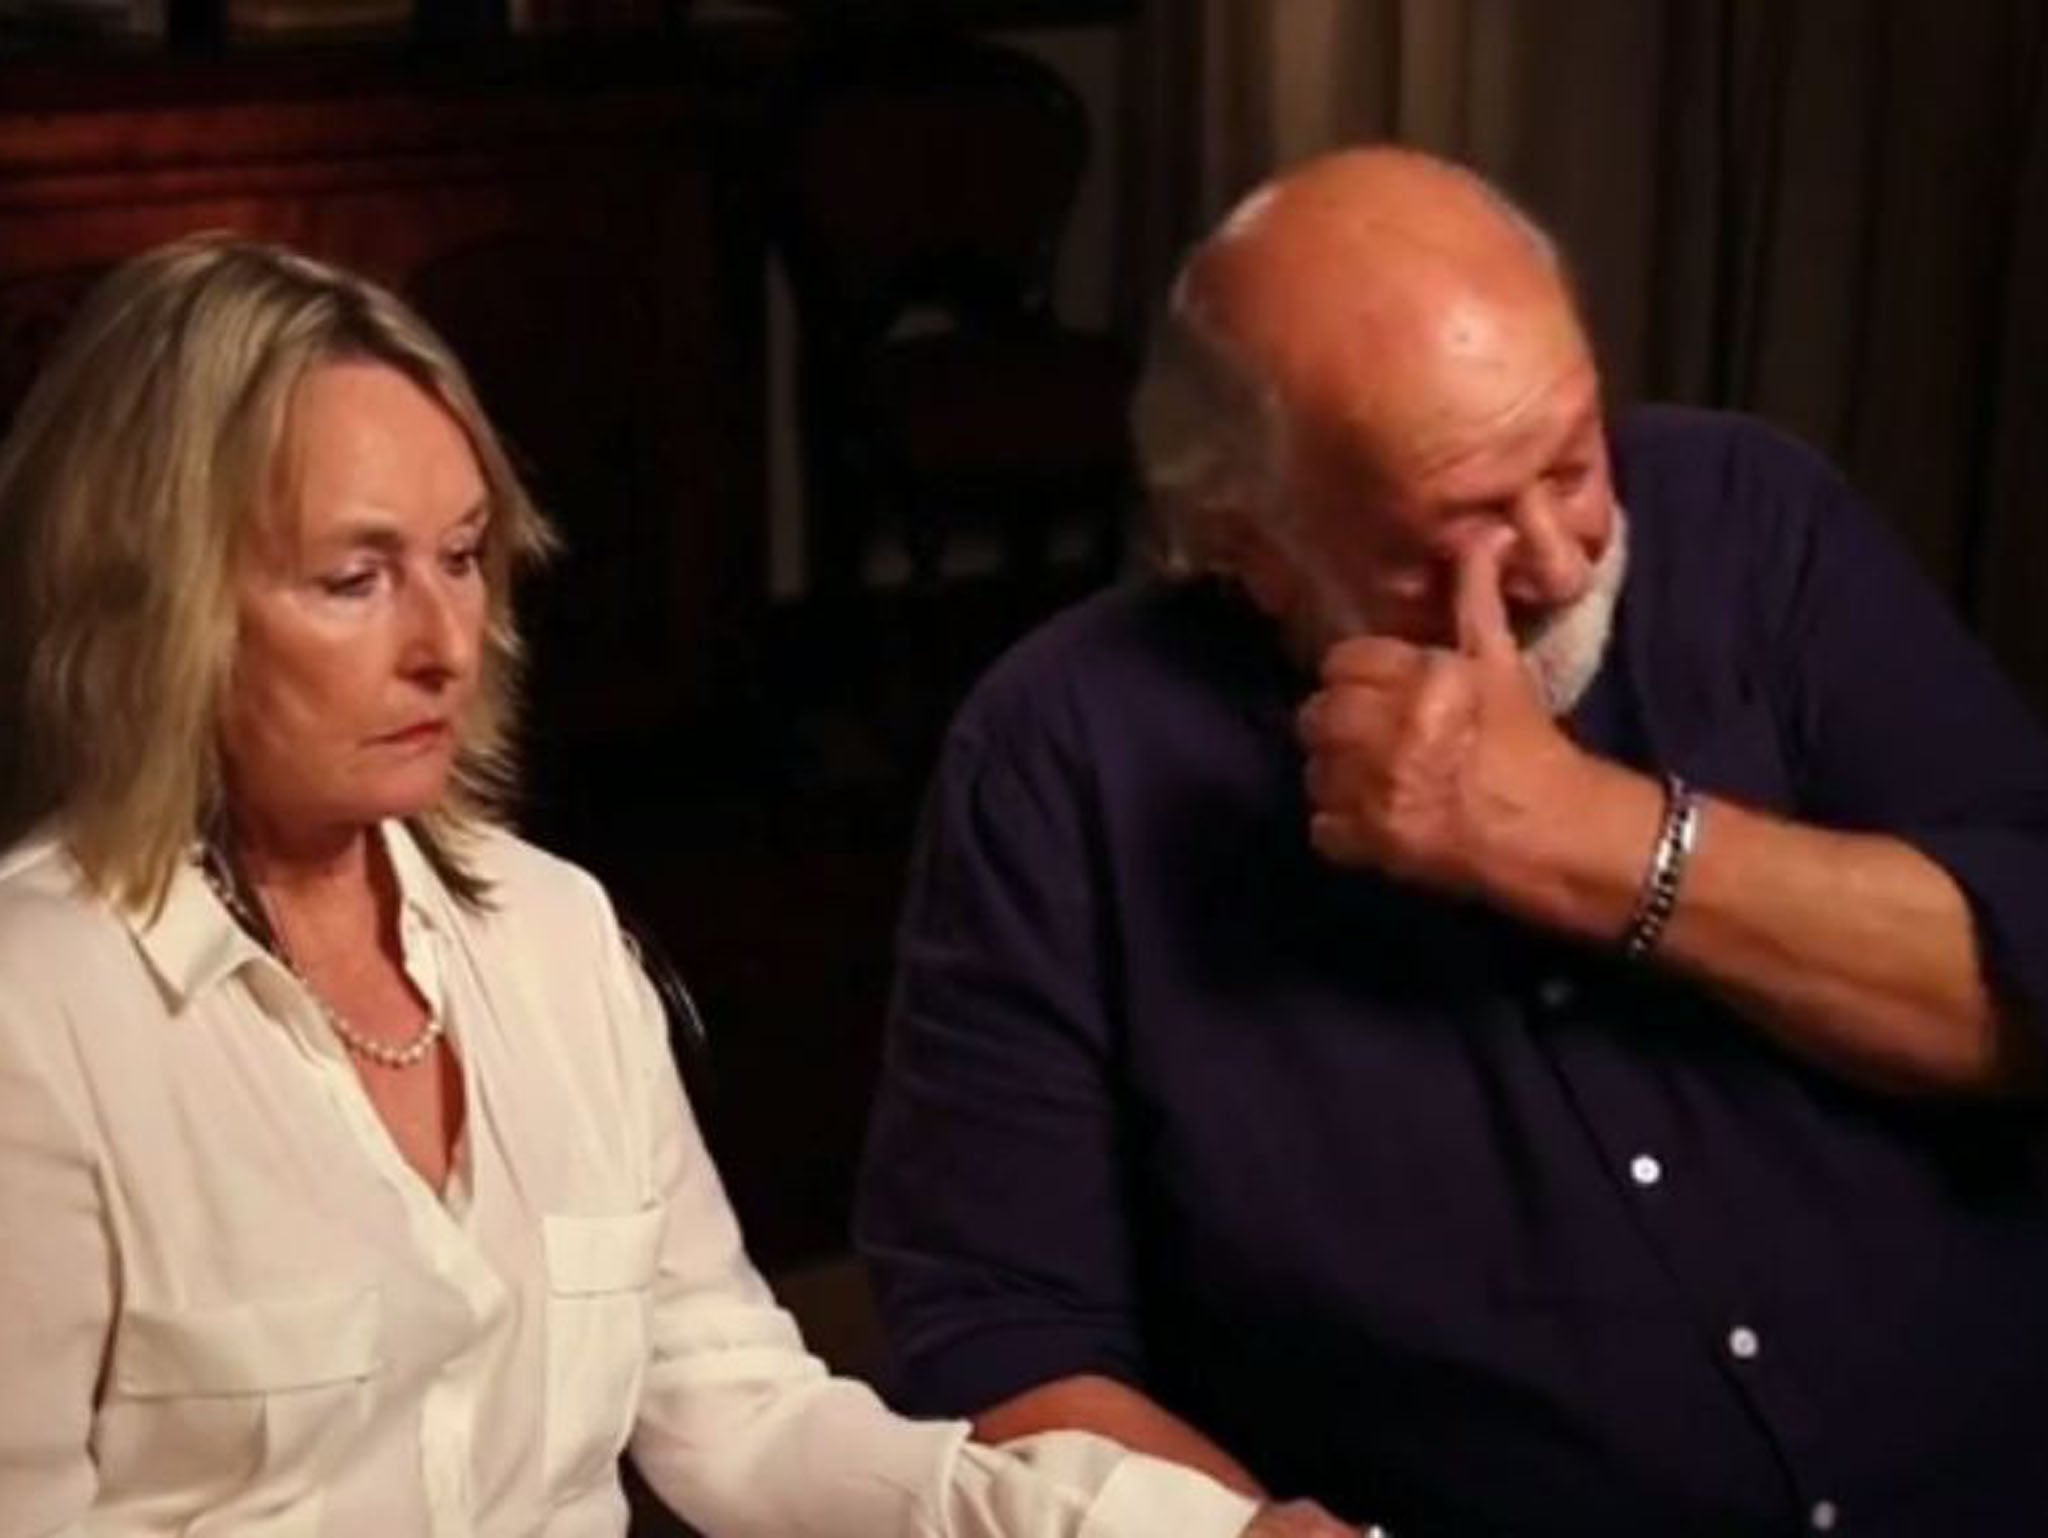 June and Barry Steenkamp, the parents of late model Reeva, are emotional during an interview for BBC 3 documentary Oscar Pistorius - The Truth